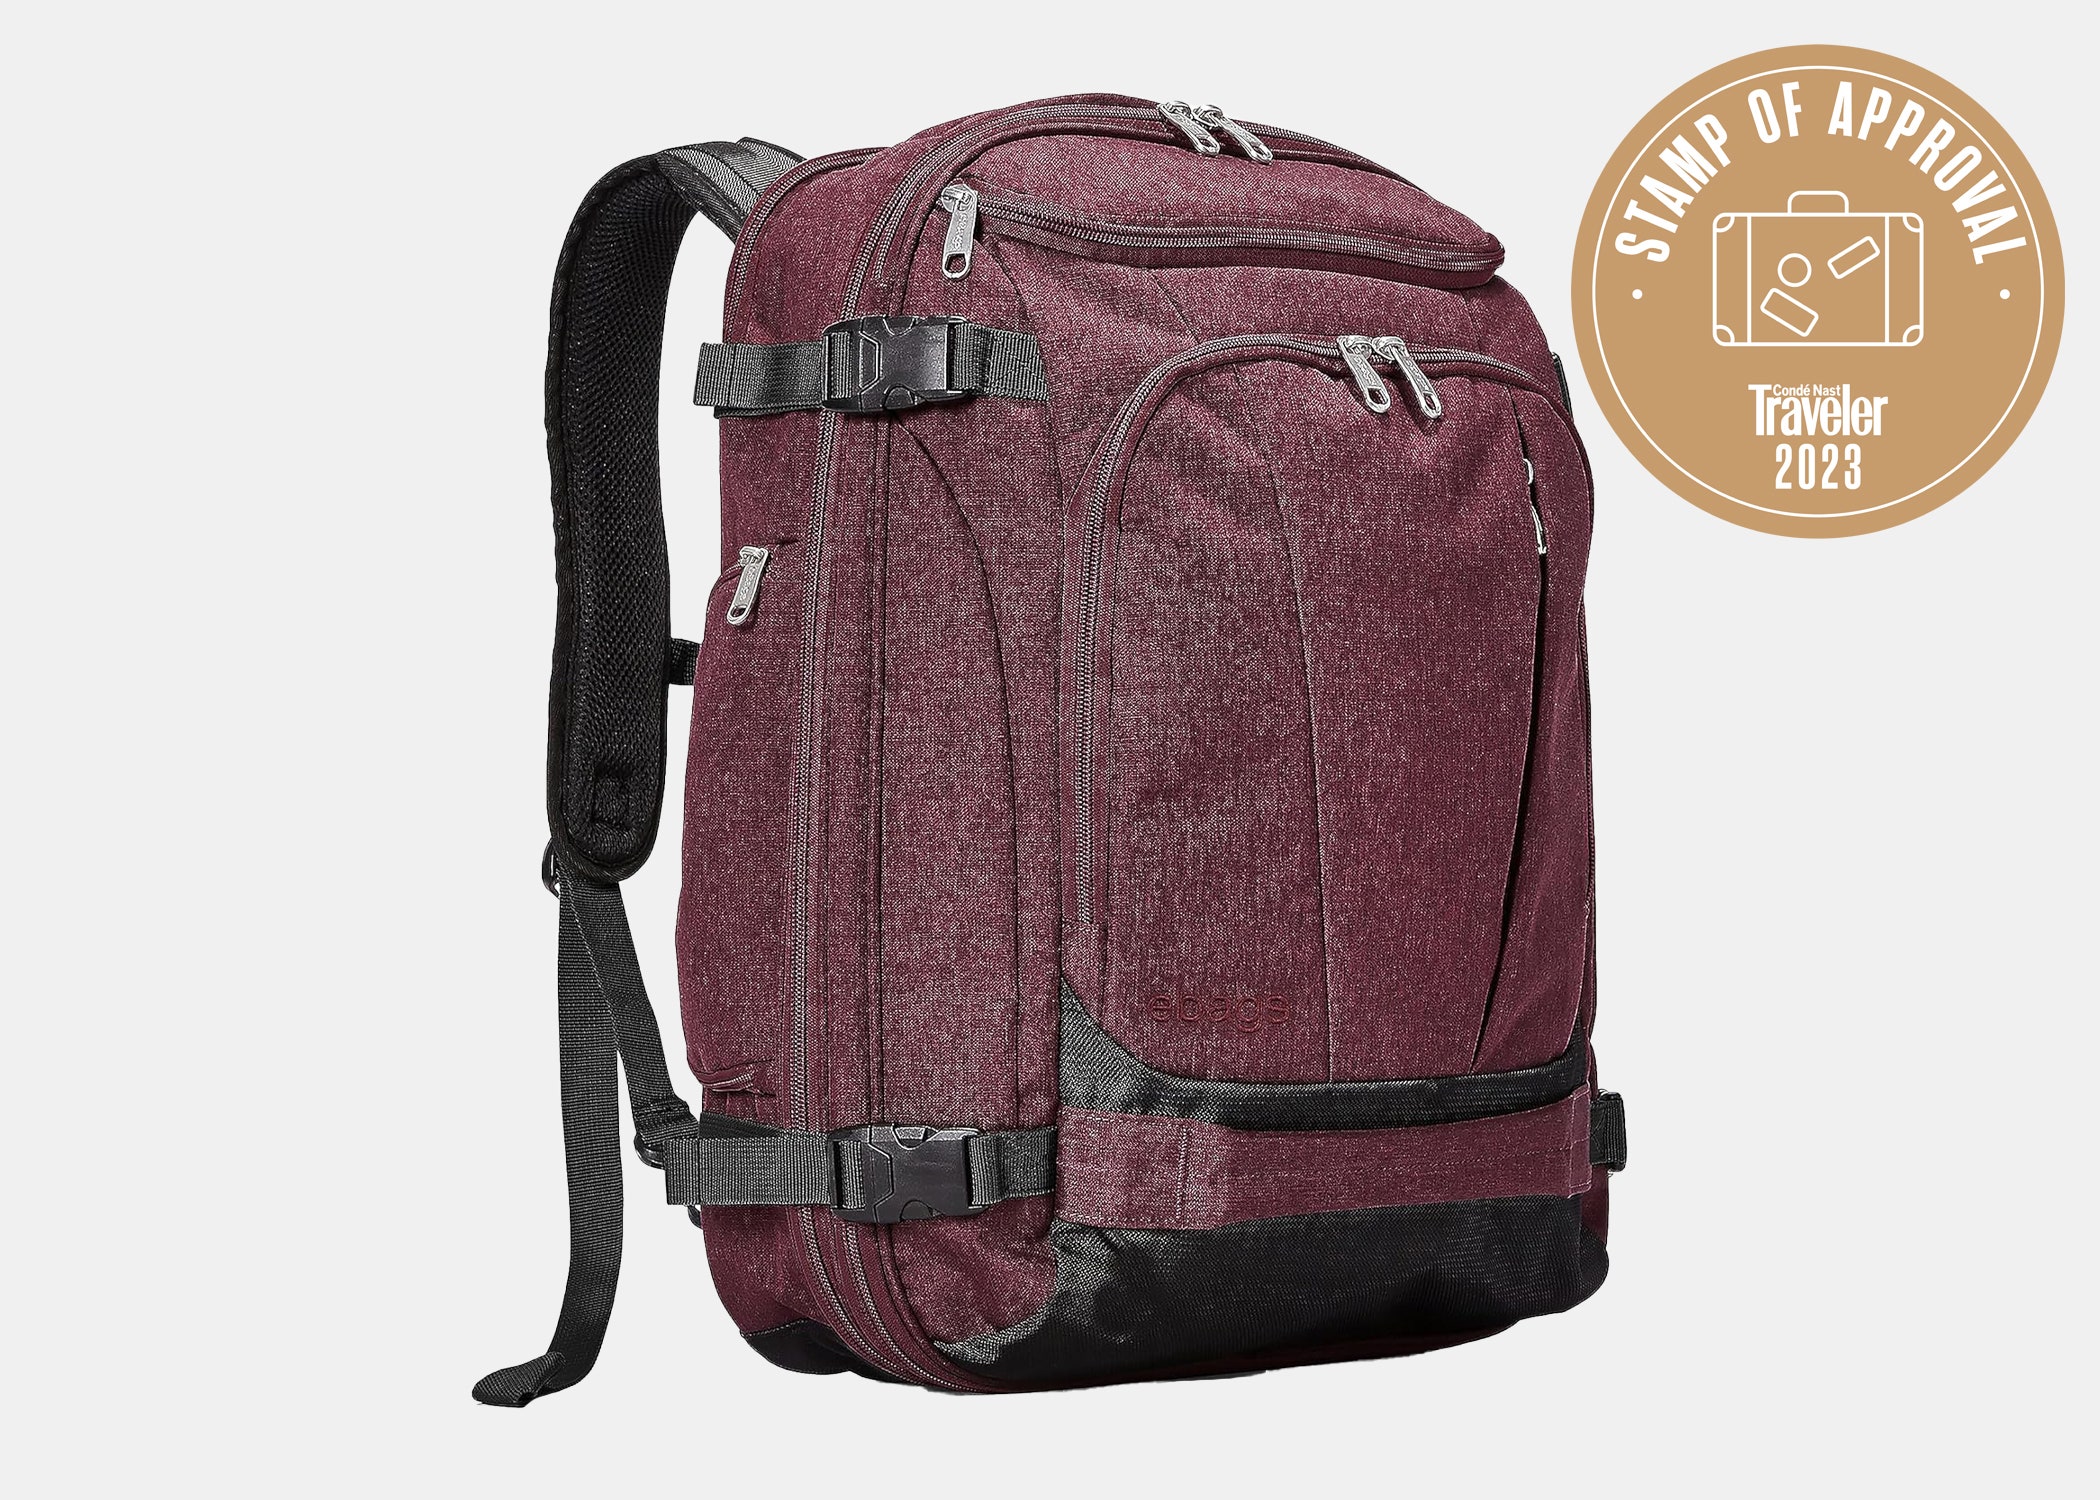 <p><em>Traveler</em> contributor Tori Harstein says the eBags Mother Lode Jr. backpack is “perfect for weekend trips and can save a buck for thrifty travelers limited to personal items. For longer vacations, it’s probably best to supplement it with an additional <a href="https://www.cntraveler.com/story/best-carry-on-luggage?mbid=synd_msn_rss&utm_source=msn&utm_medium=syndication">carry-on</a>.” It's compact enough to fit under the seat in front of you on an airplane and comes with backpack straps that are easy to stow. It you need some extra room, you can use the 1.5-inch zipper expansion. Choose from a few different ways to wear it: enjoy hands-free travel on your back, tuck the traps away and carry it as a briefcase, or throw the bag over one shoulder with a convenient duffel strap.</p> <p><strong>Pros:</strong> Many separate compartments, opens like a suitcase which makes packing easier<br> <strong>Cons:</strong> Can feel heavy on your back</p> $144, Amazon. <a href="https://www.amazon.com/dp/B07JGCMN8K">Get it now!</a><p>Sign up to receive the latest news, expert tips, and inspiration on all things travel</p><a href="https://www.cntraveler.com/newsletter/the-daily?sourceCode=msnsend">Inspire Me</a>